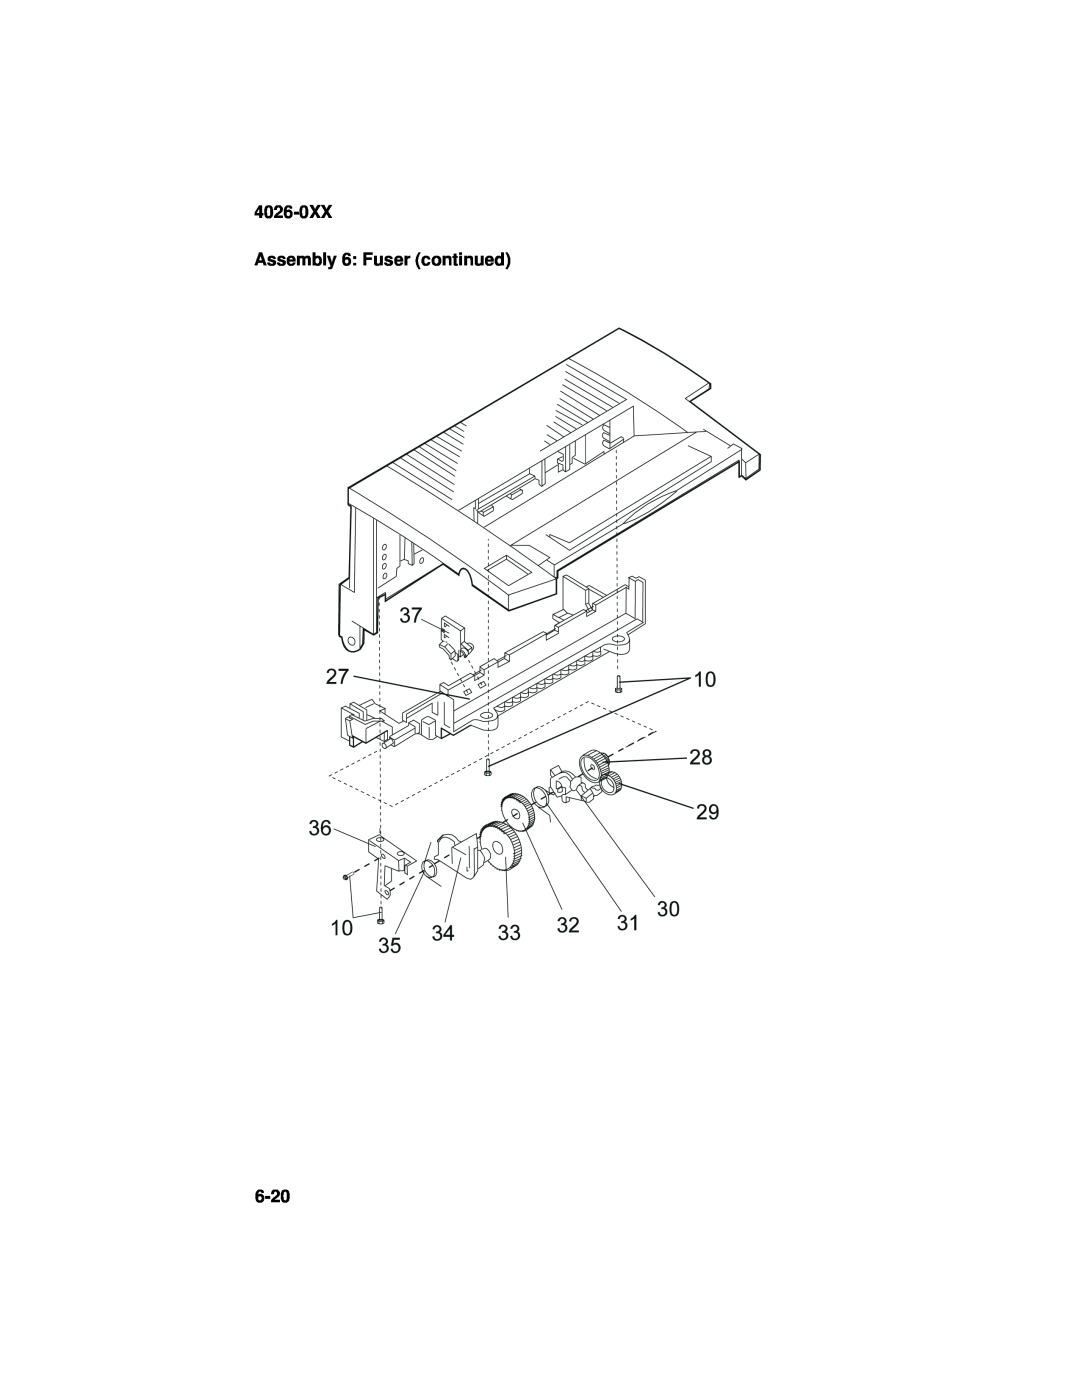 Lexmark manual 4026-0XX Assembly 6: Fuser continued, 6-20 